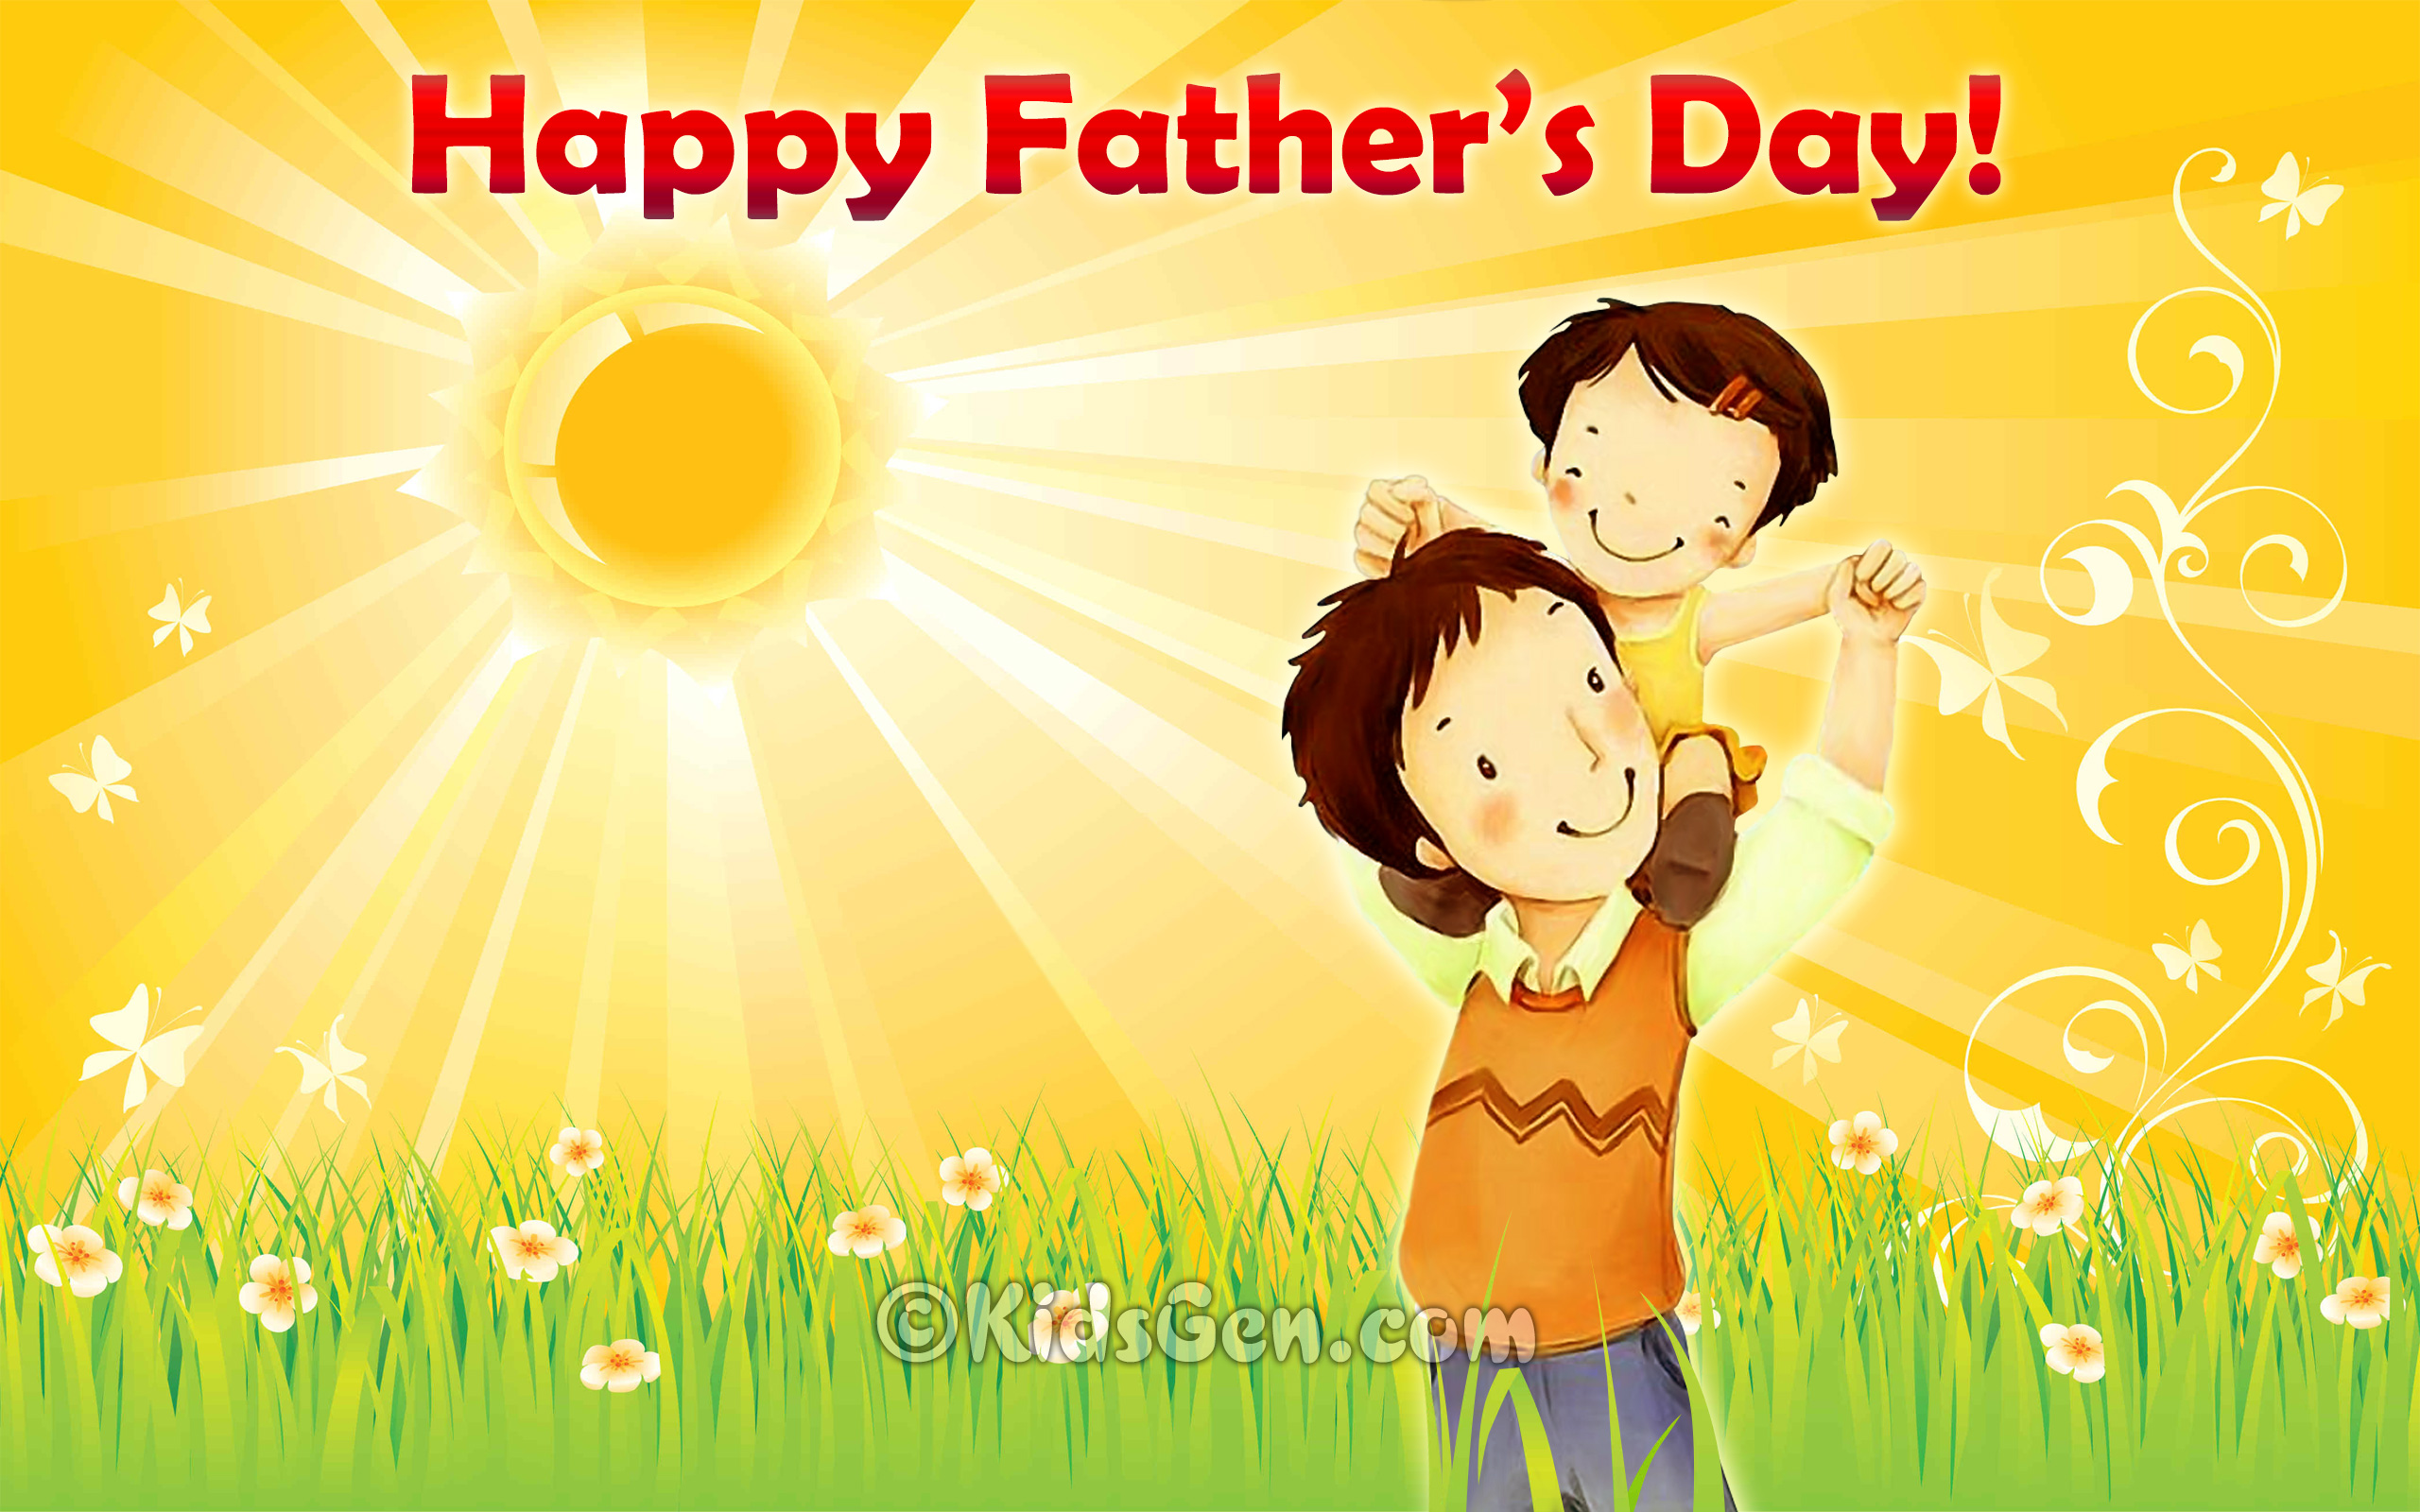 Fathers Day Background Images  Free Download on Freepik